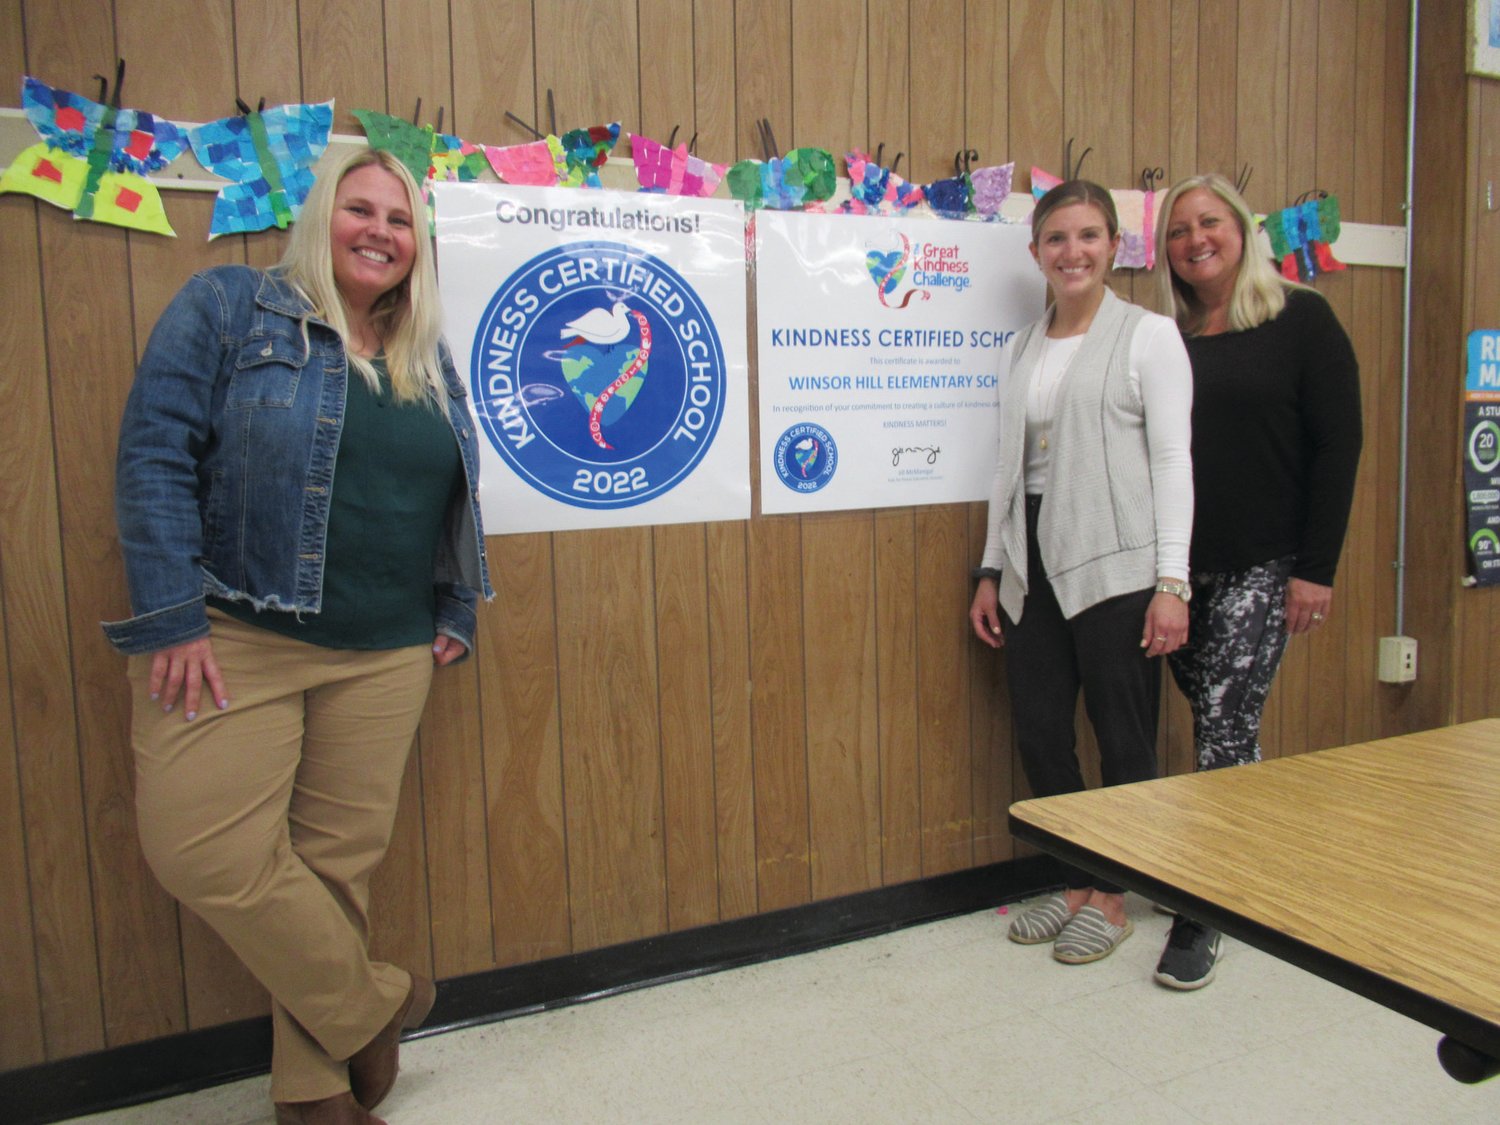 NATIONAL NICHE: Winsor Hill Principal Dr. Amy Burns (left), Behavorial Specialist Briana Bielecki and Health/Physical Education Teacher Susan Parillo are smiles after hanging the banner that designates the Johnston elementary school as a Certified Kindness School.